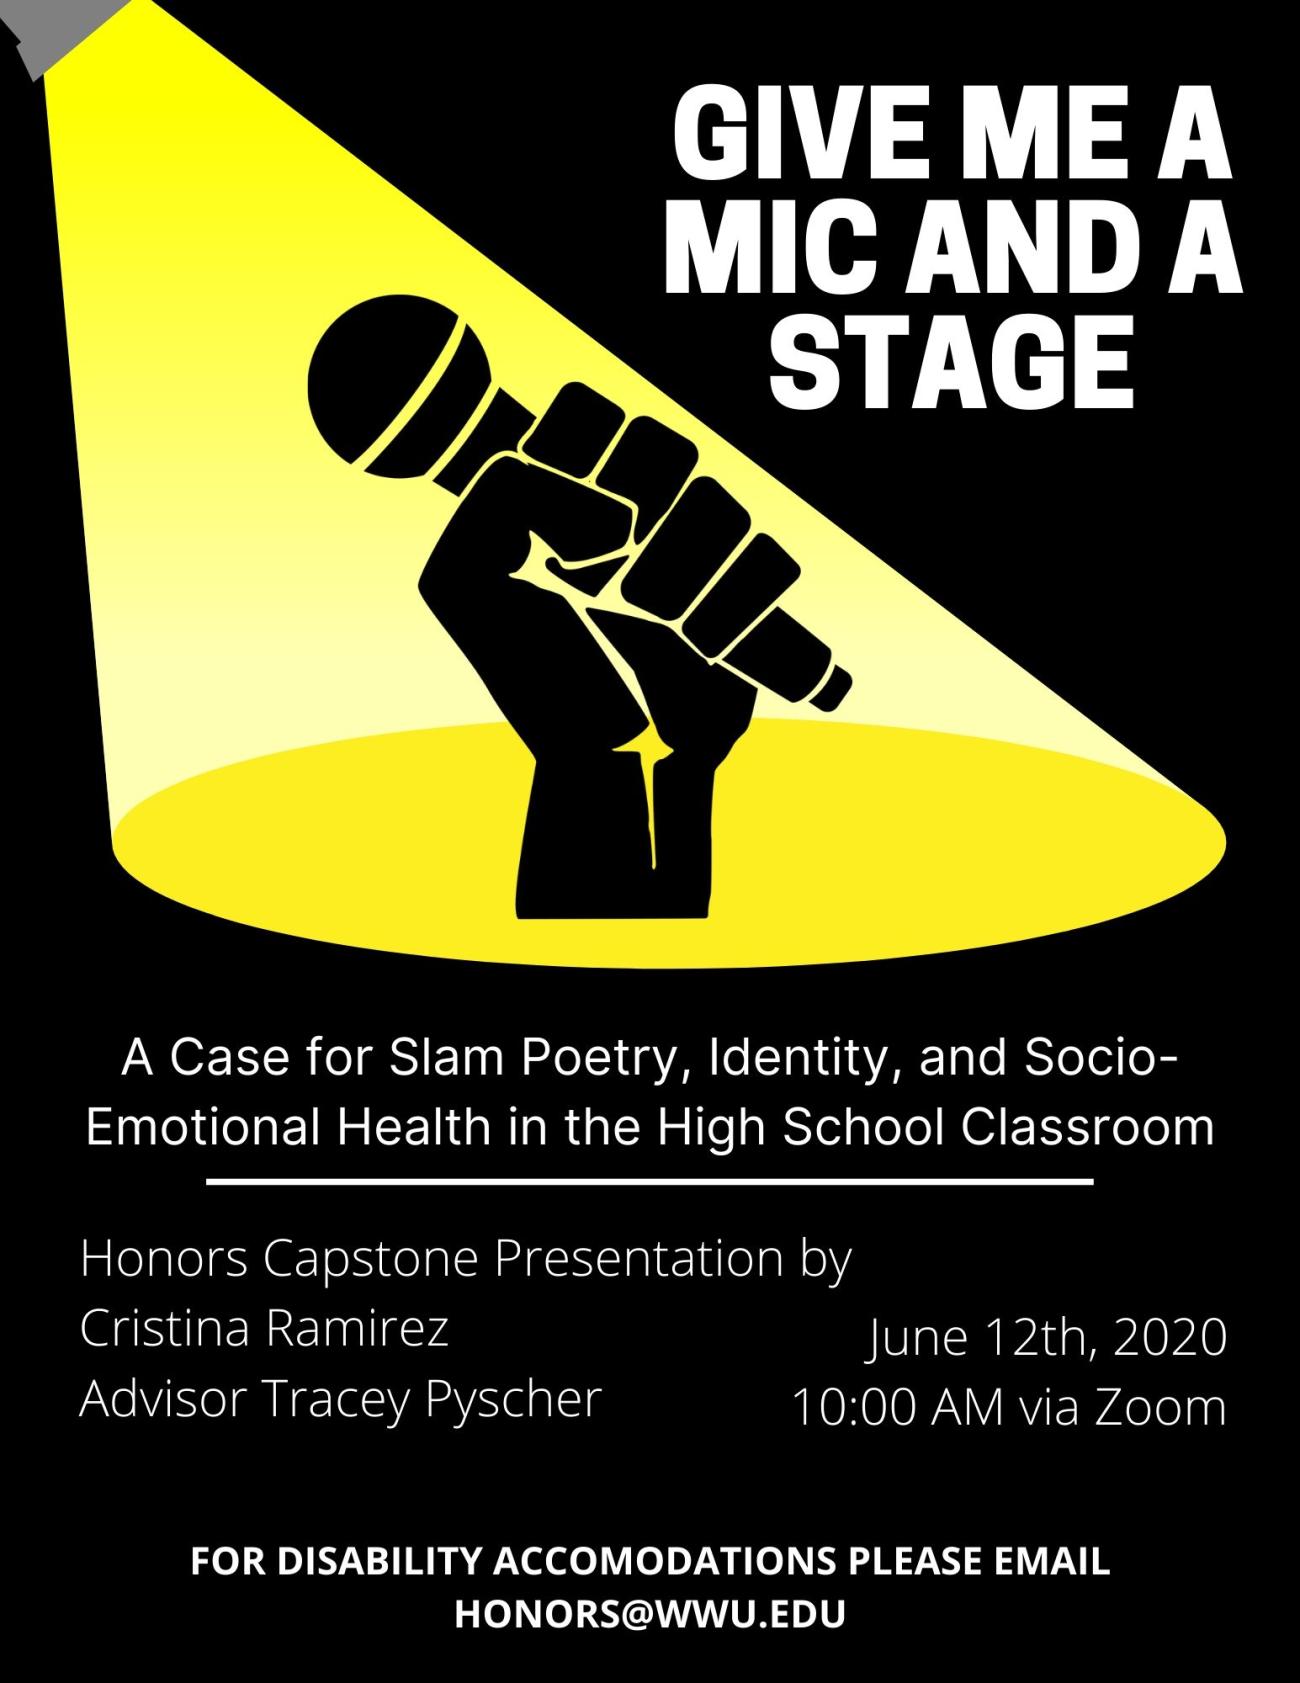 Image: Top center of this poster features a cartoon black hand gripping a microphone in front of a shining yellow stage light. The rest of the poster has a black background with white text. Text: "GIVE ME A MIC AND A STAGE. A Case for Slam Poetry, Identity, and Socio-Emotional Health in the High School Classroom. Honors Capstone by Cristina Ramirez, Advisor Tracey Pyscher. June 12th, 2020, 10:00 AM via Zoom. For disability accommodations please email honors@wwu.edu."